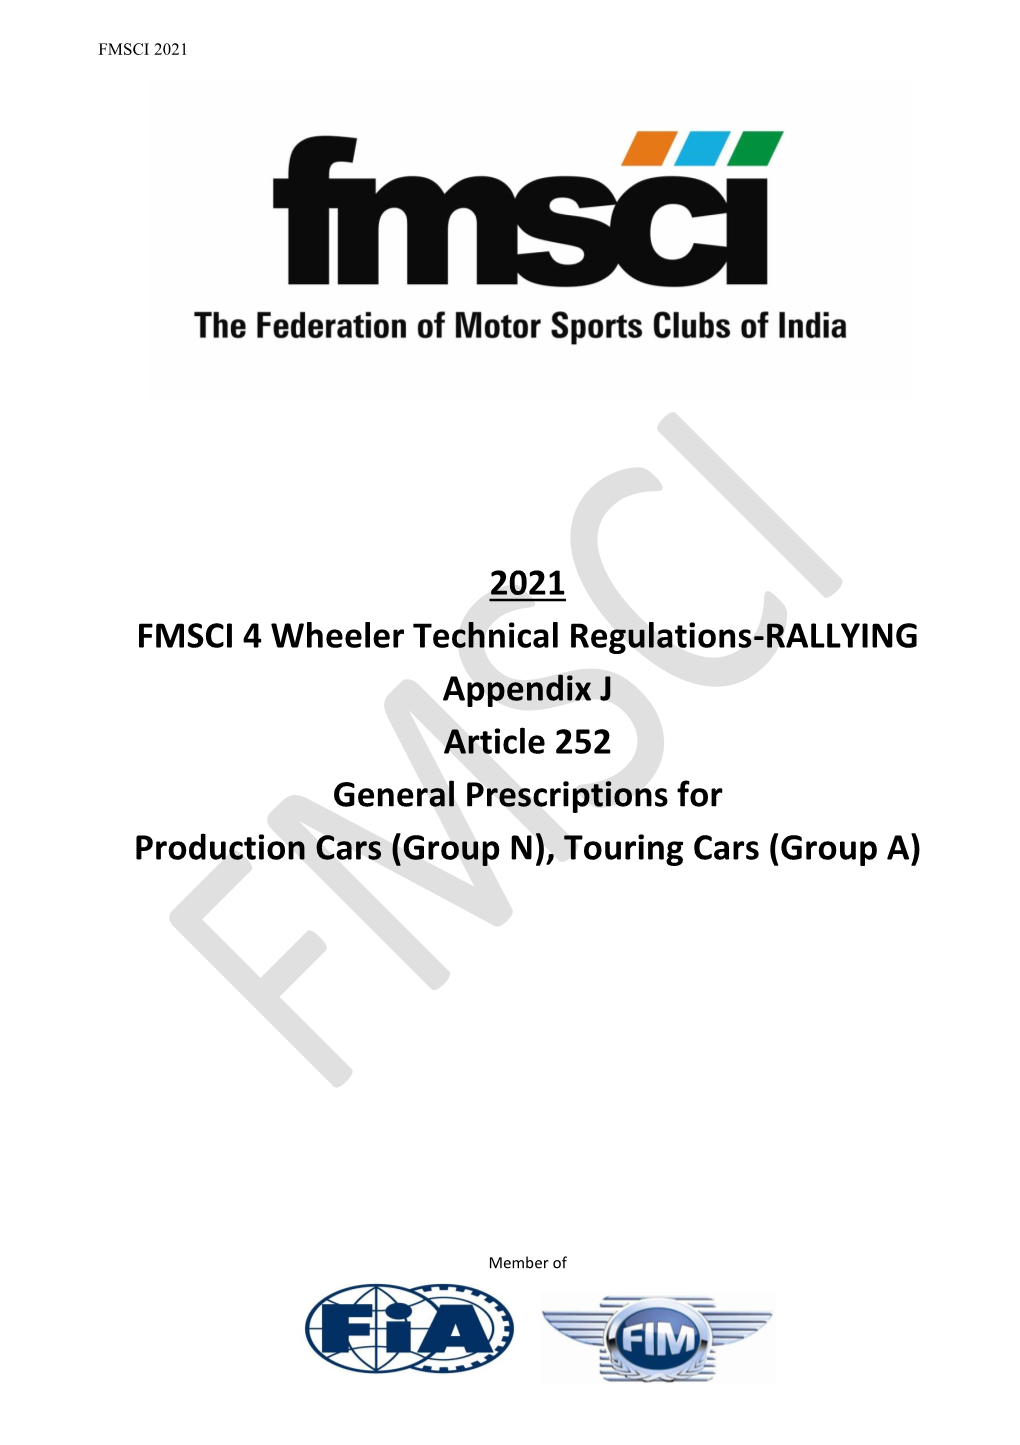 FMSCI Article 252 General Prescriptions for Production Cars (Group N) Touring Cars (Group A)